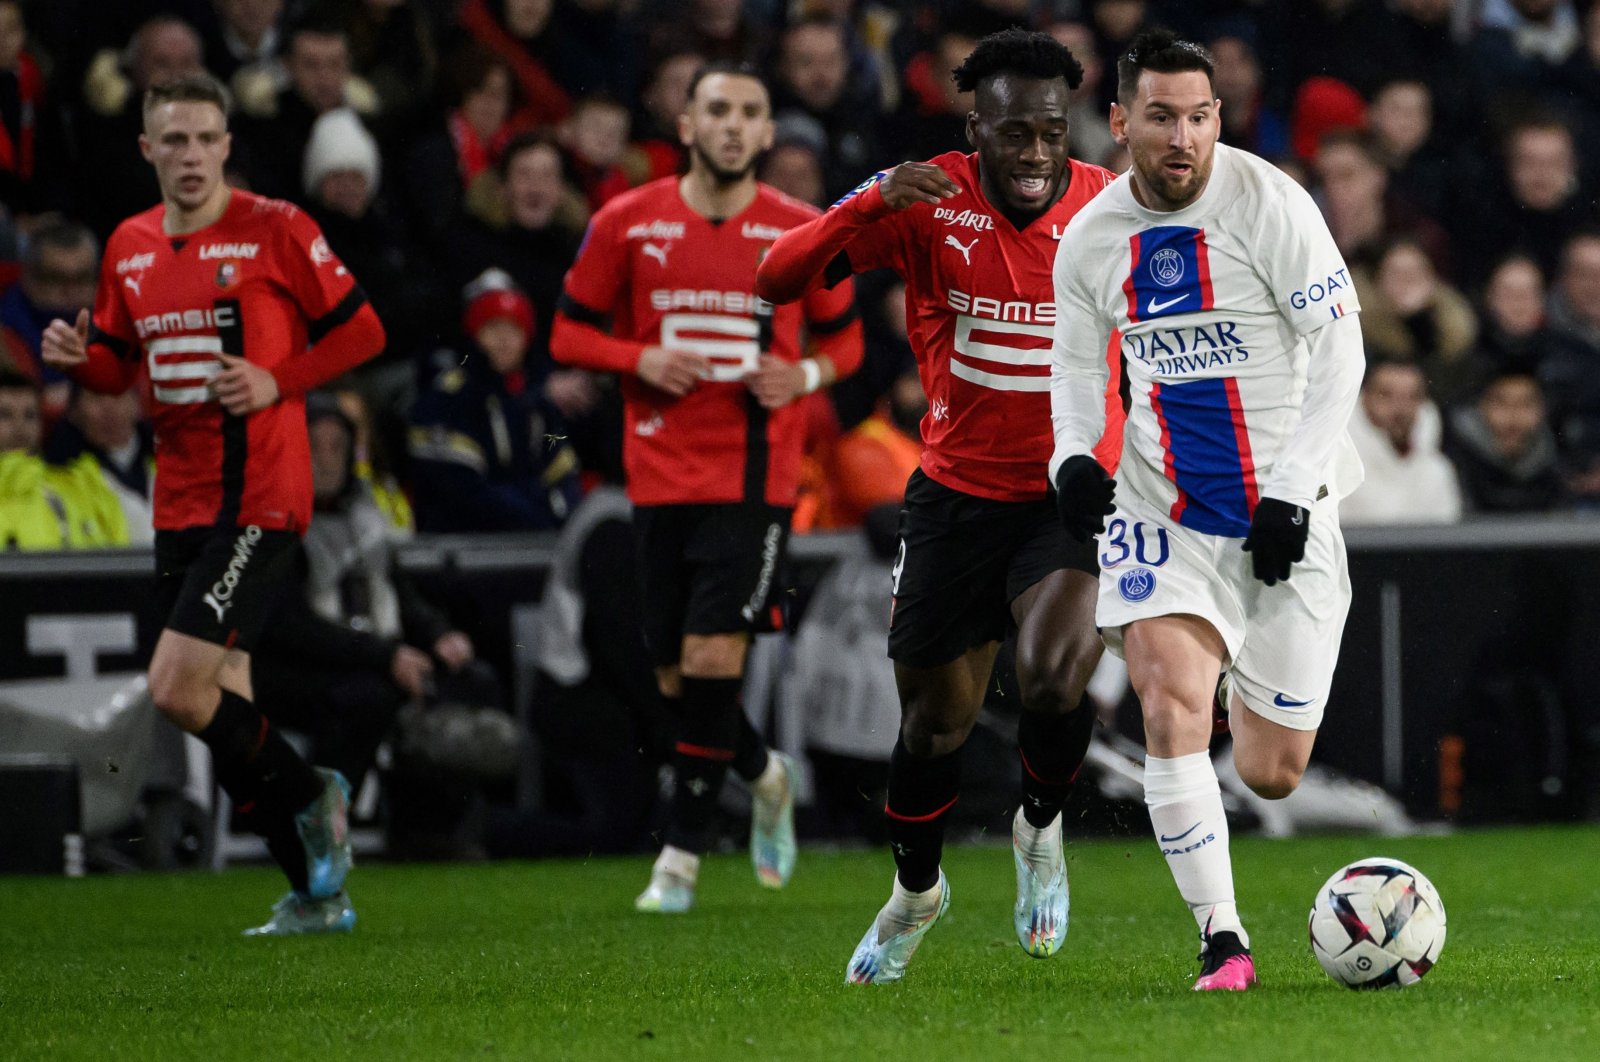 Paris Saint-Germain&#039;s Argentine forward Lionel Messi fights for the ball with Rennes&#039; French forward Arnaud Kalimuendo (2nd R) during the French L1 football match between Stade Rennais FC and Paris Saint-Germain (PSG) at the Roazhon Park stadium, Rennes, France, Jan. 15, 2023. (AFP Photo)